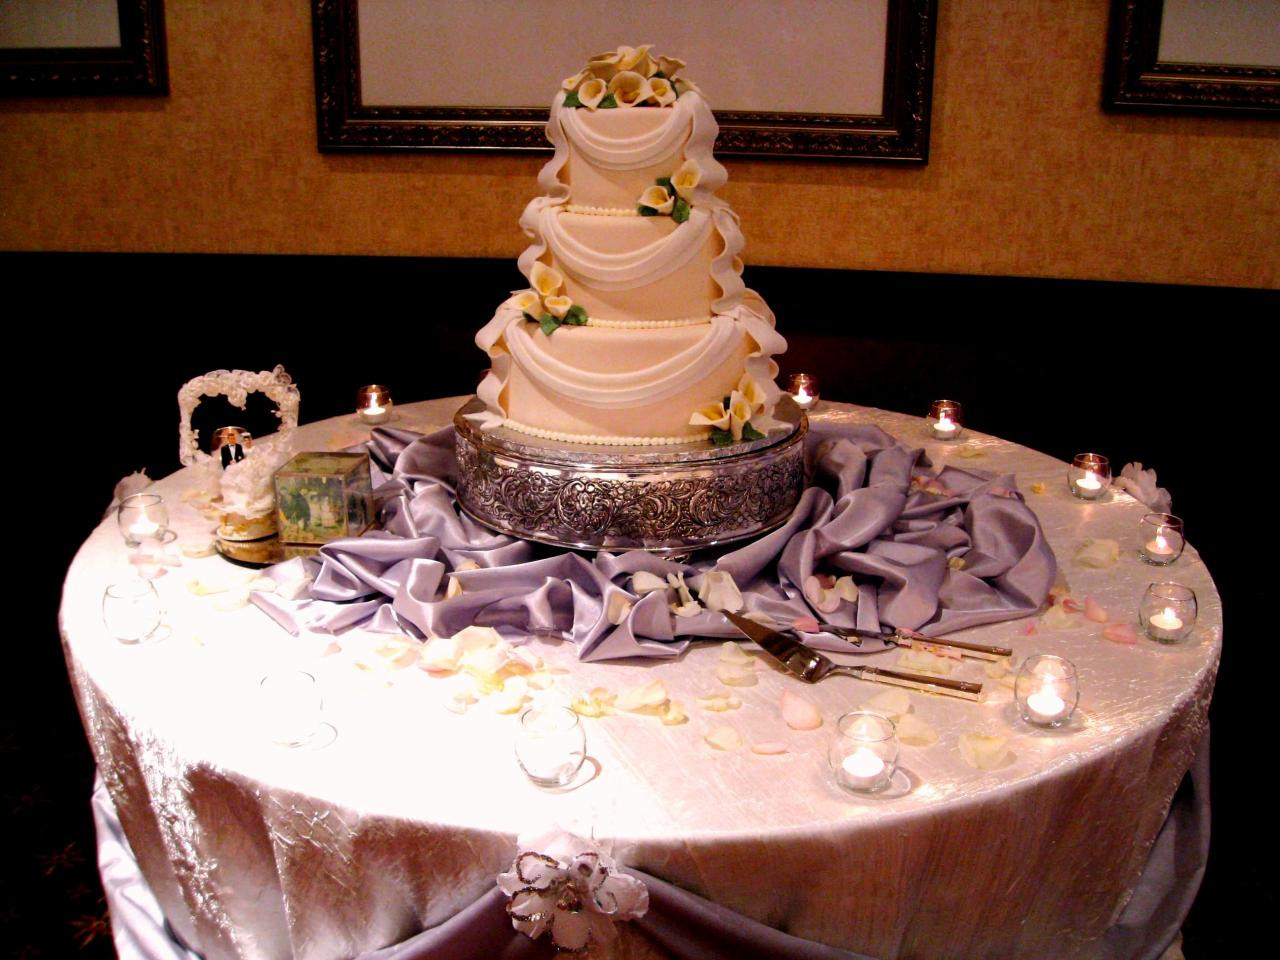 How To Decorate Wedding Cakes
 Top Wedding Cake Table Decorations